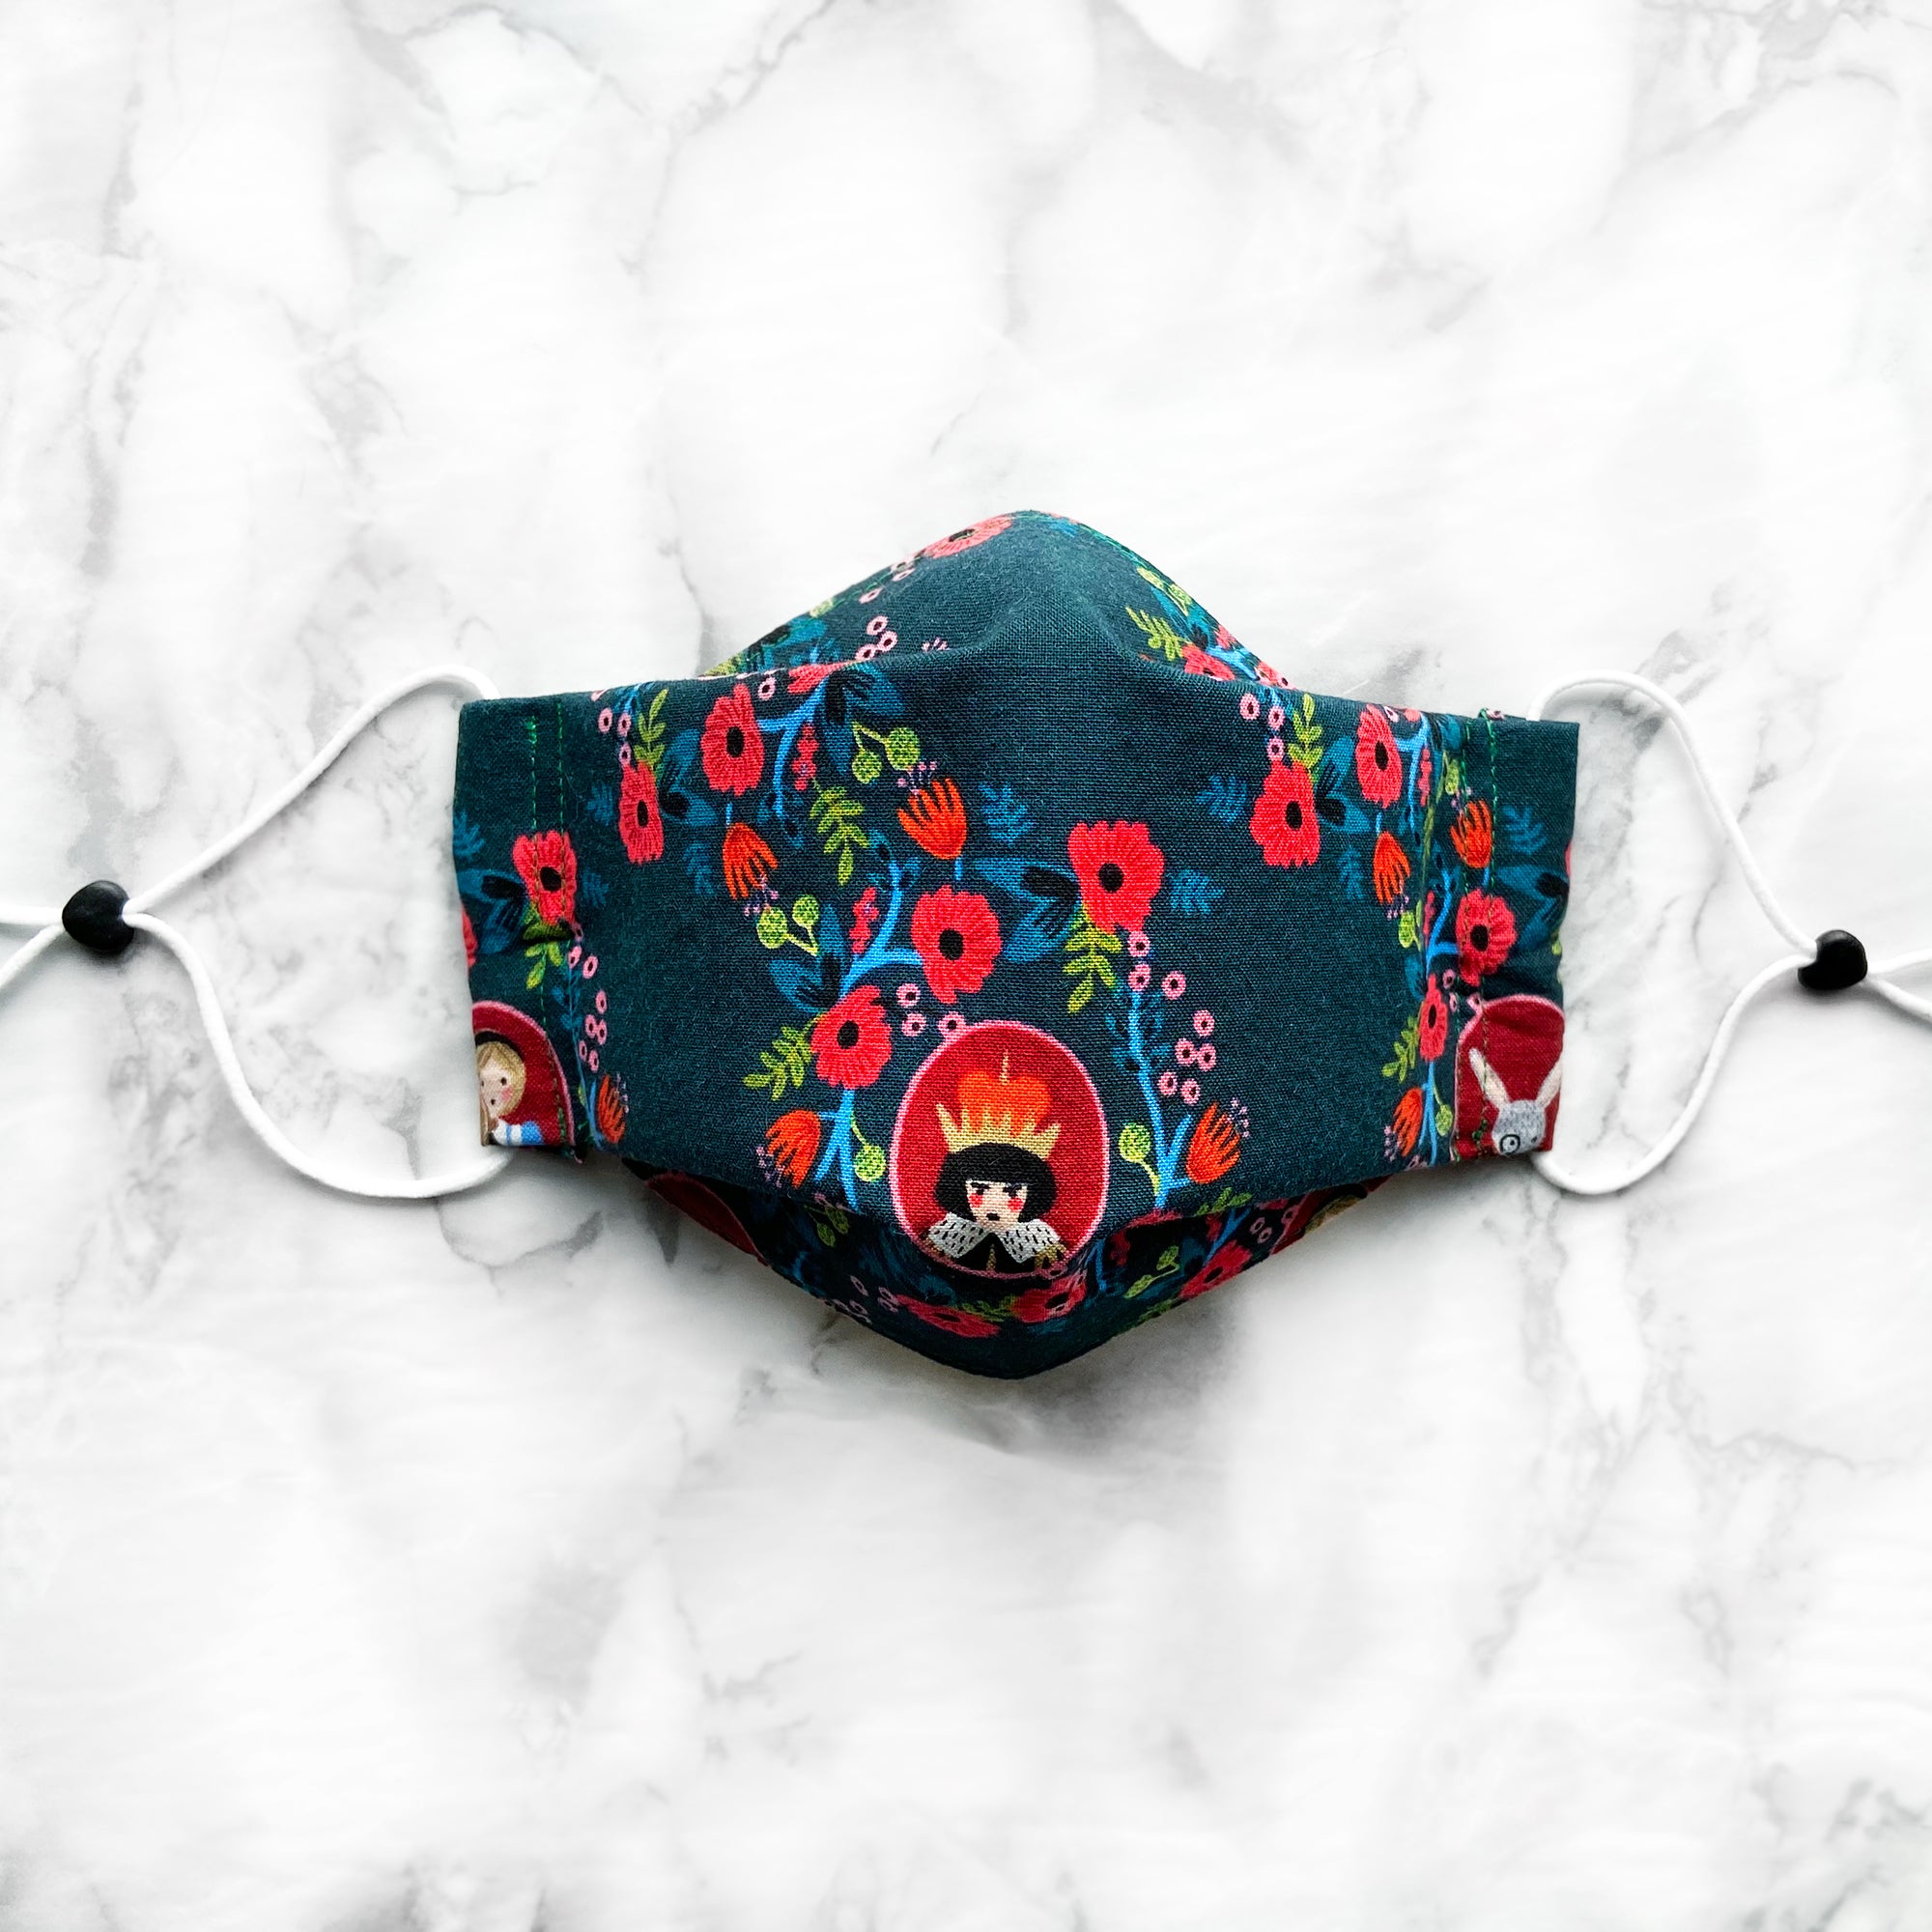 SPECIAL EDITION Rifle Paper Co. Wonderland "Cameo" (Forest Green) 3D Pleated Face Mask